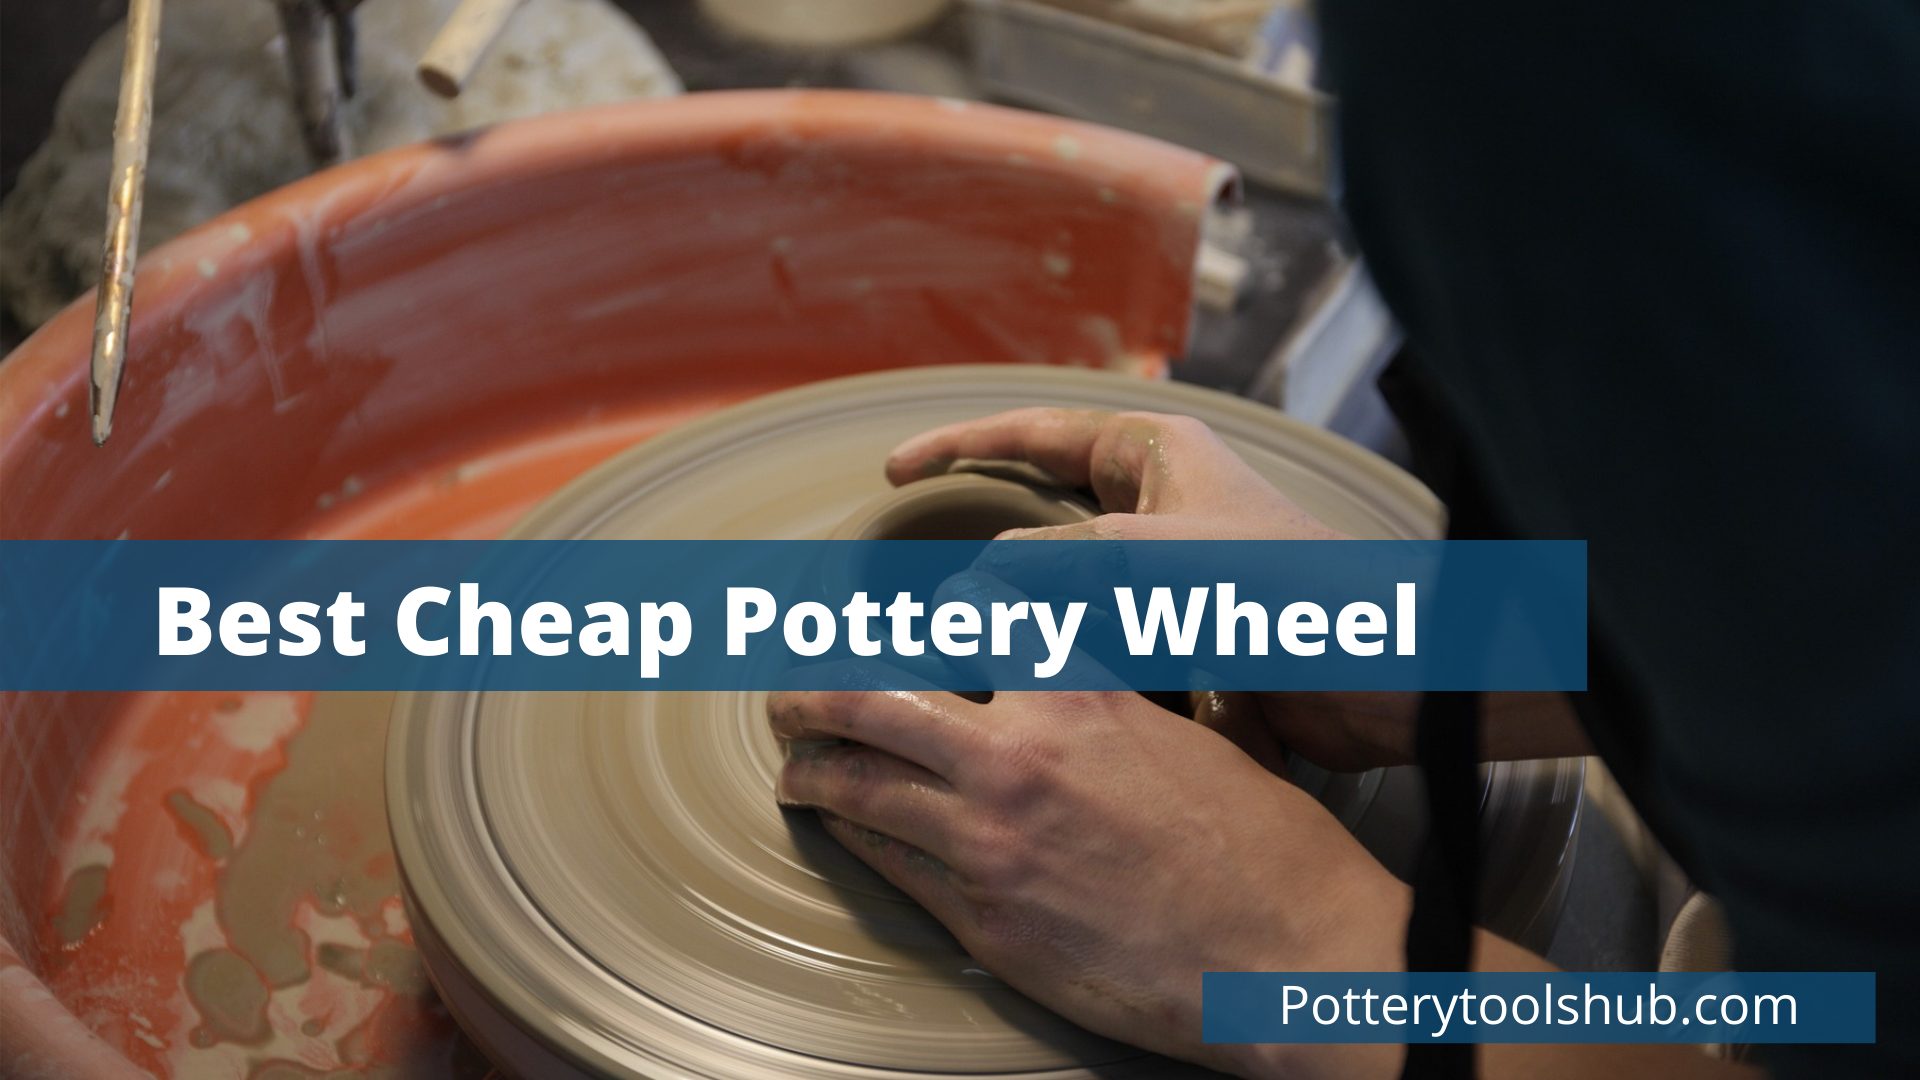 The Ultimate List Of The Best Cheap Pottery Wheel 2022